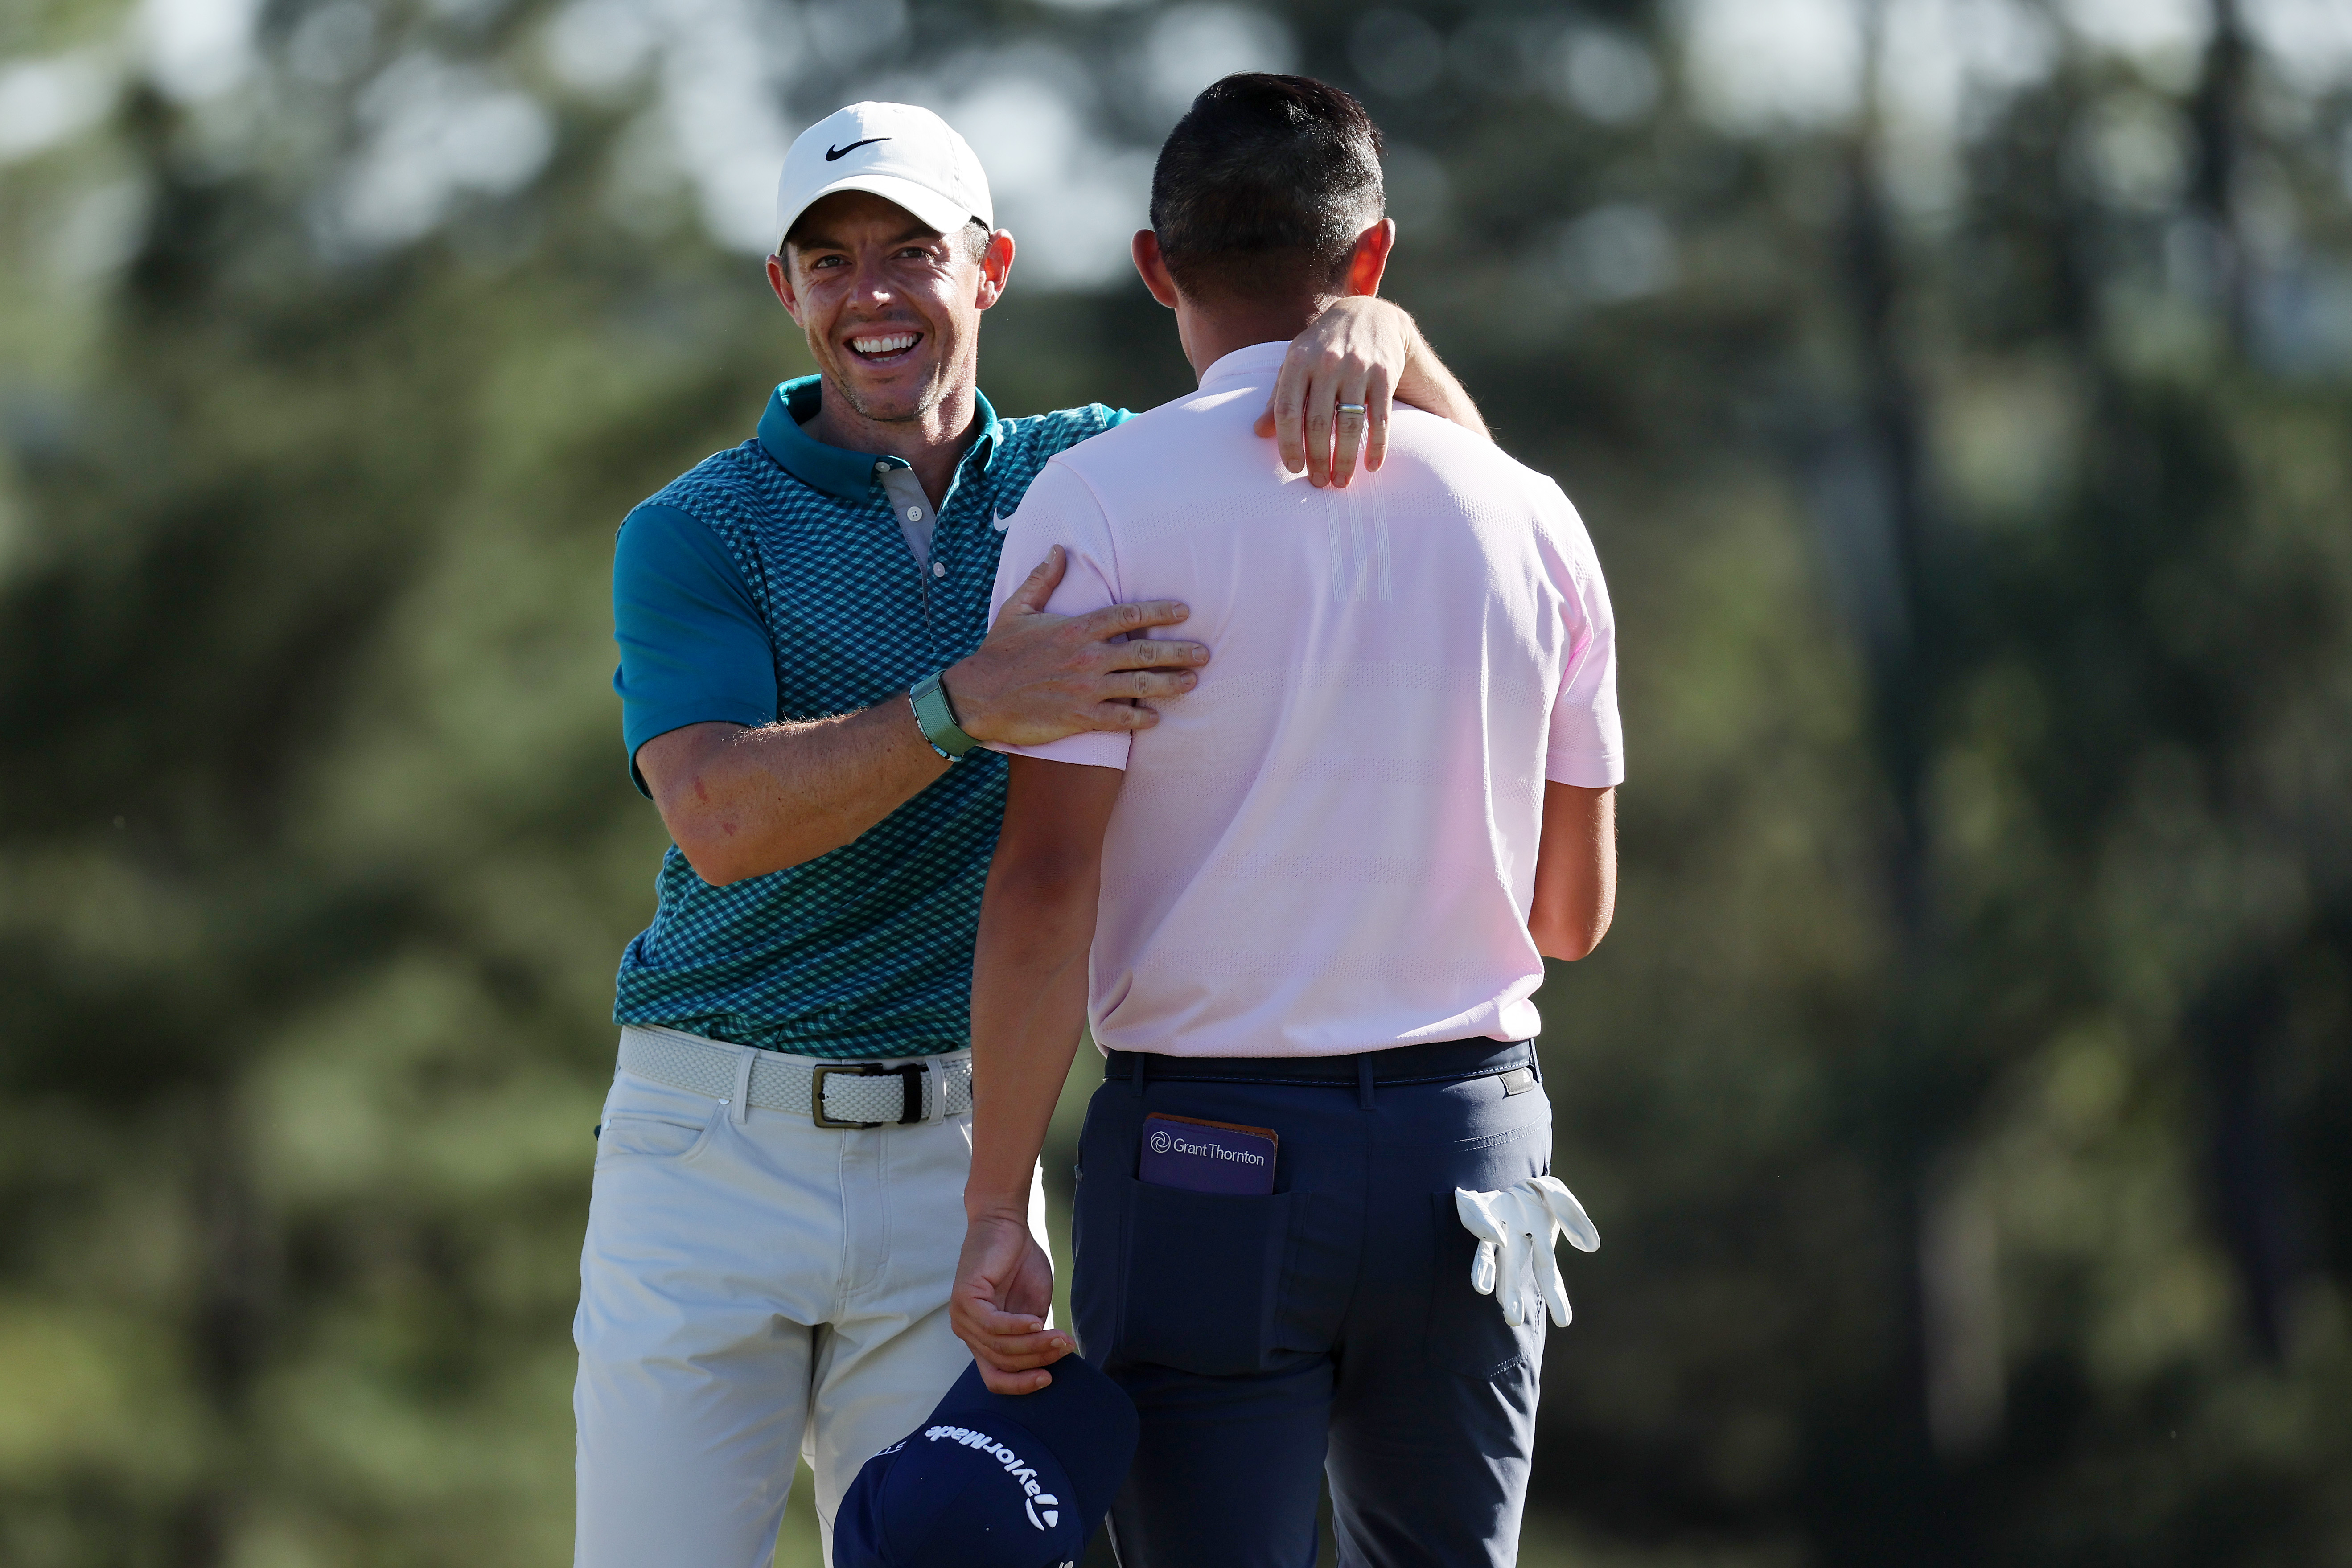 Rory McIlroy of Northern Ireland (L) and Collin Morikawa celebrate on the 18th green after finishing their round during the final round of the Masters at Augusta National Golf Club on April 10, 2022 in Augusta, Georgia.